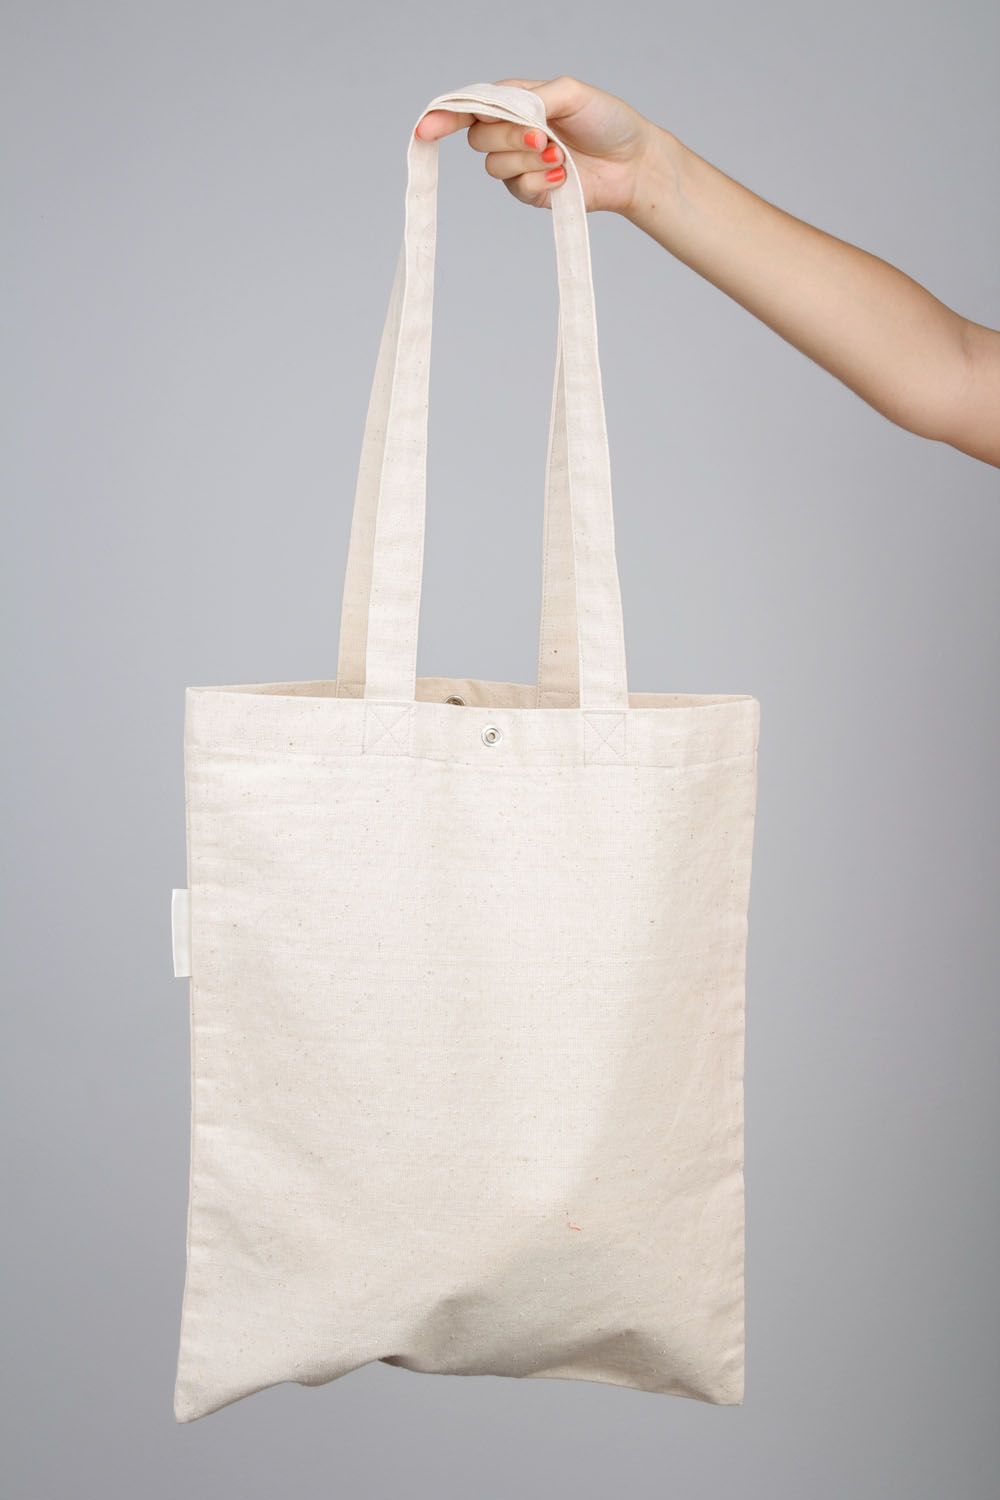 Fabric bag in eco-style photo 3